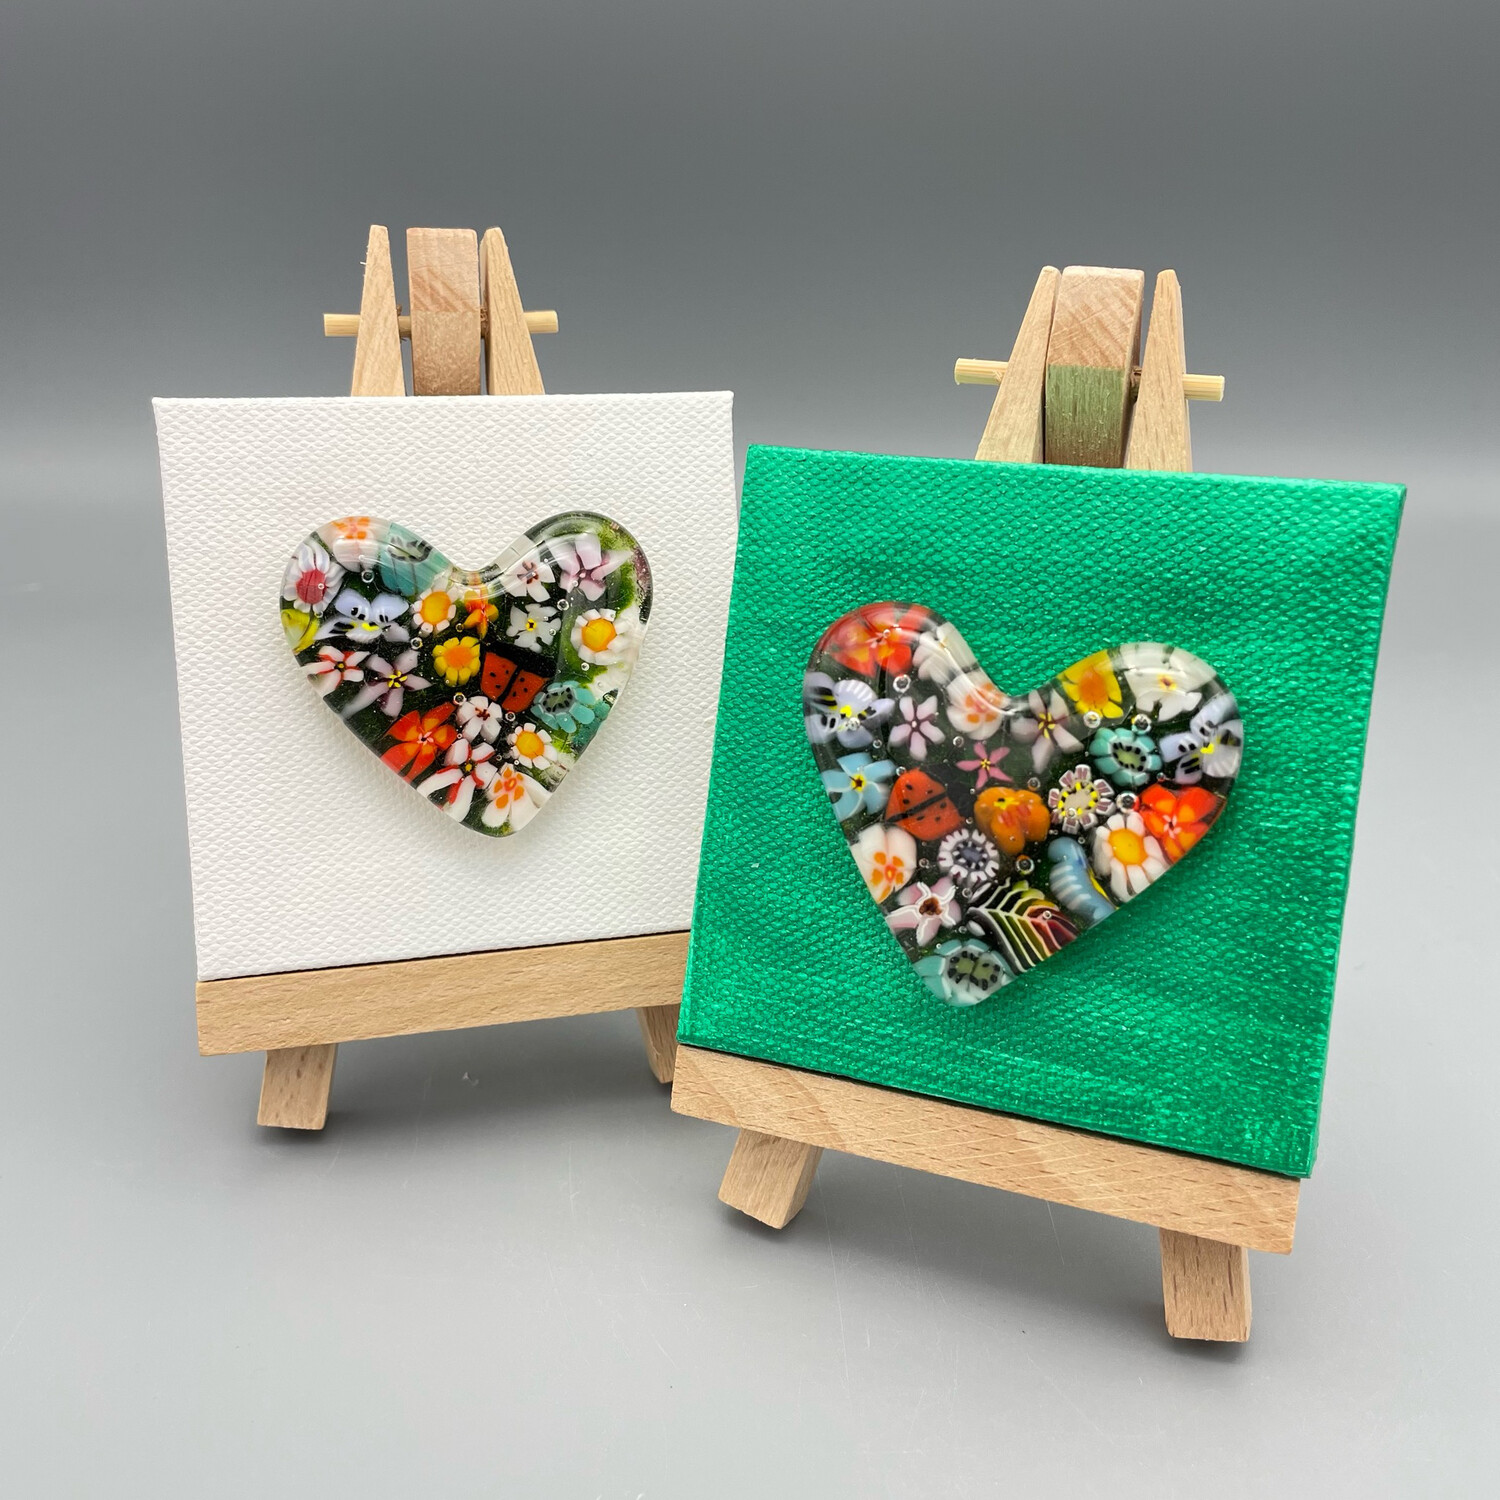 FREE with $50 purchase: Heart Art!